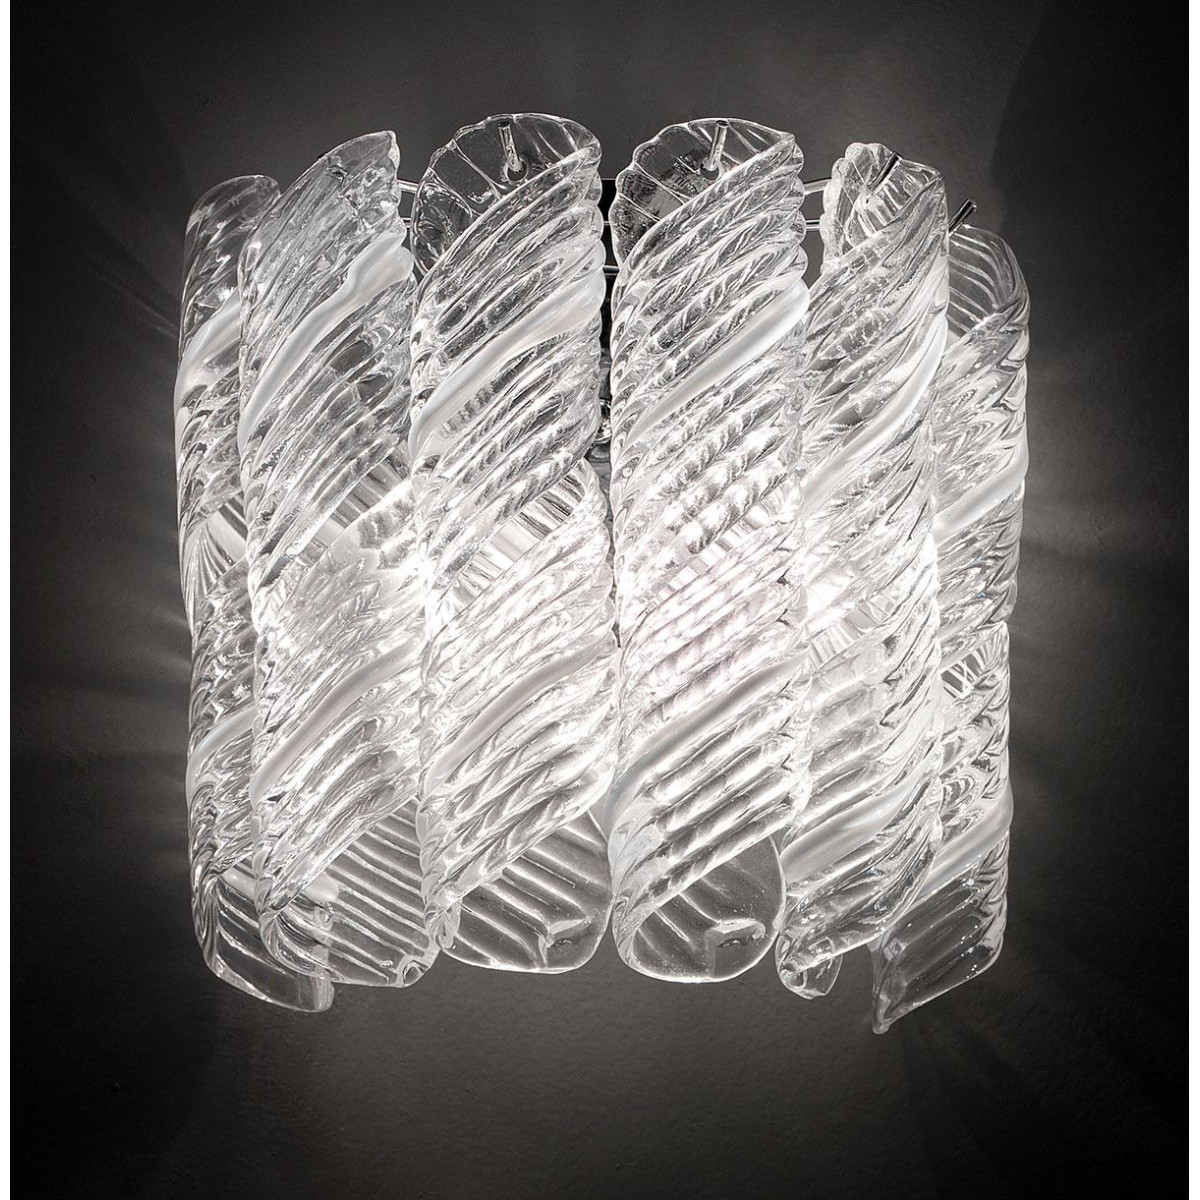 "Shirley" Murano glass sconce - 2 lights - white and chrome